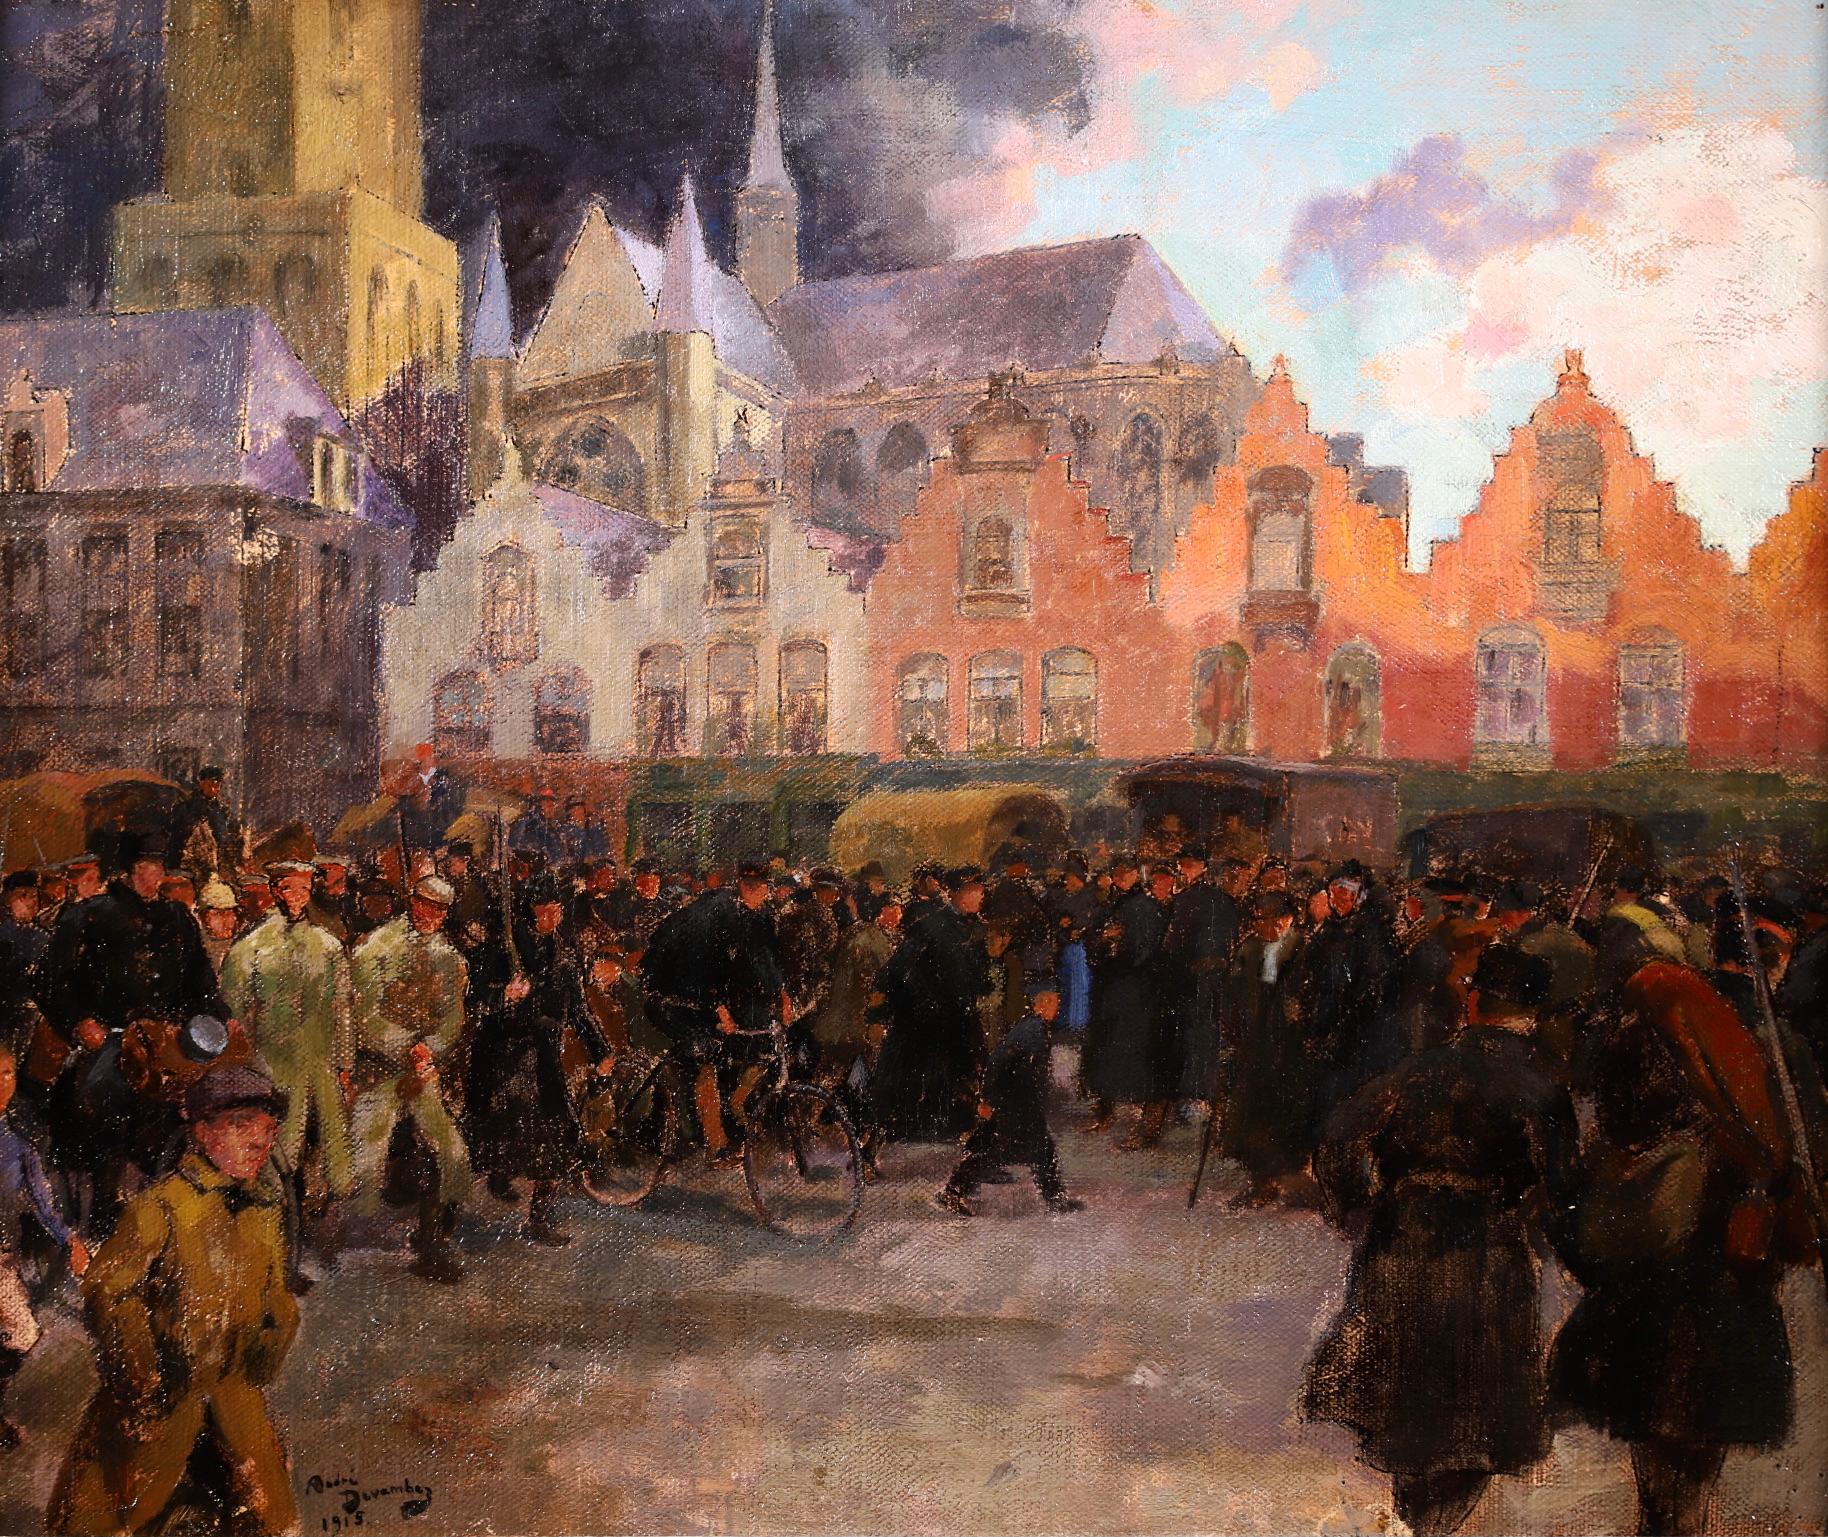 André Devambez Figurative Painting - Ypres - 1915 - Impressionist Oil, Figures in Town Landscape by Andre Devambez